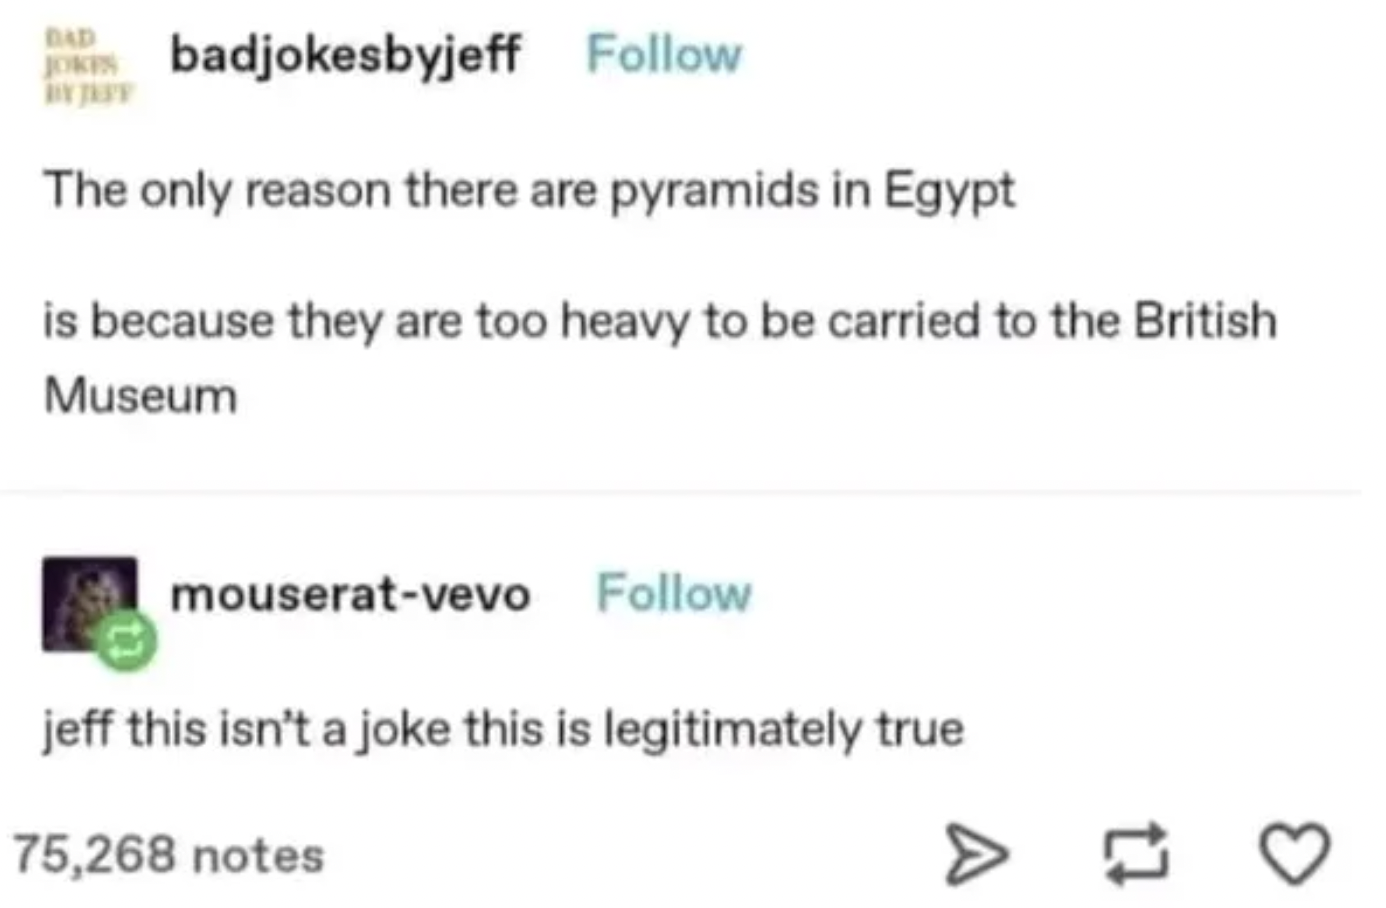 Pictures that techincally tell the truth - The only reason there are pyramids in Egypt is because they are too heavy to be carried to the British Museum